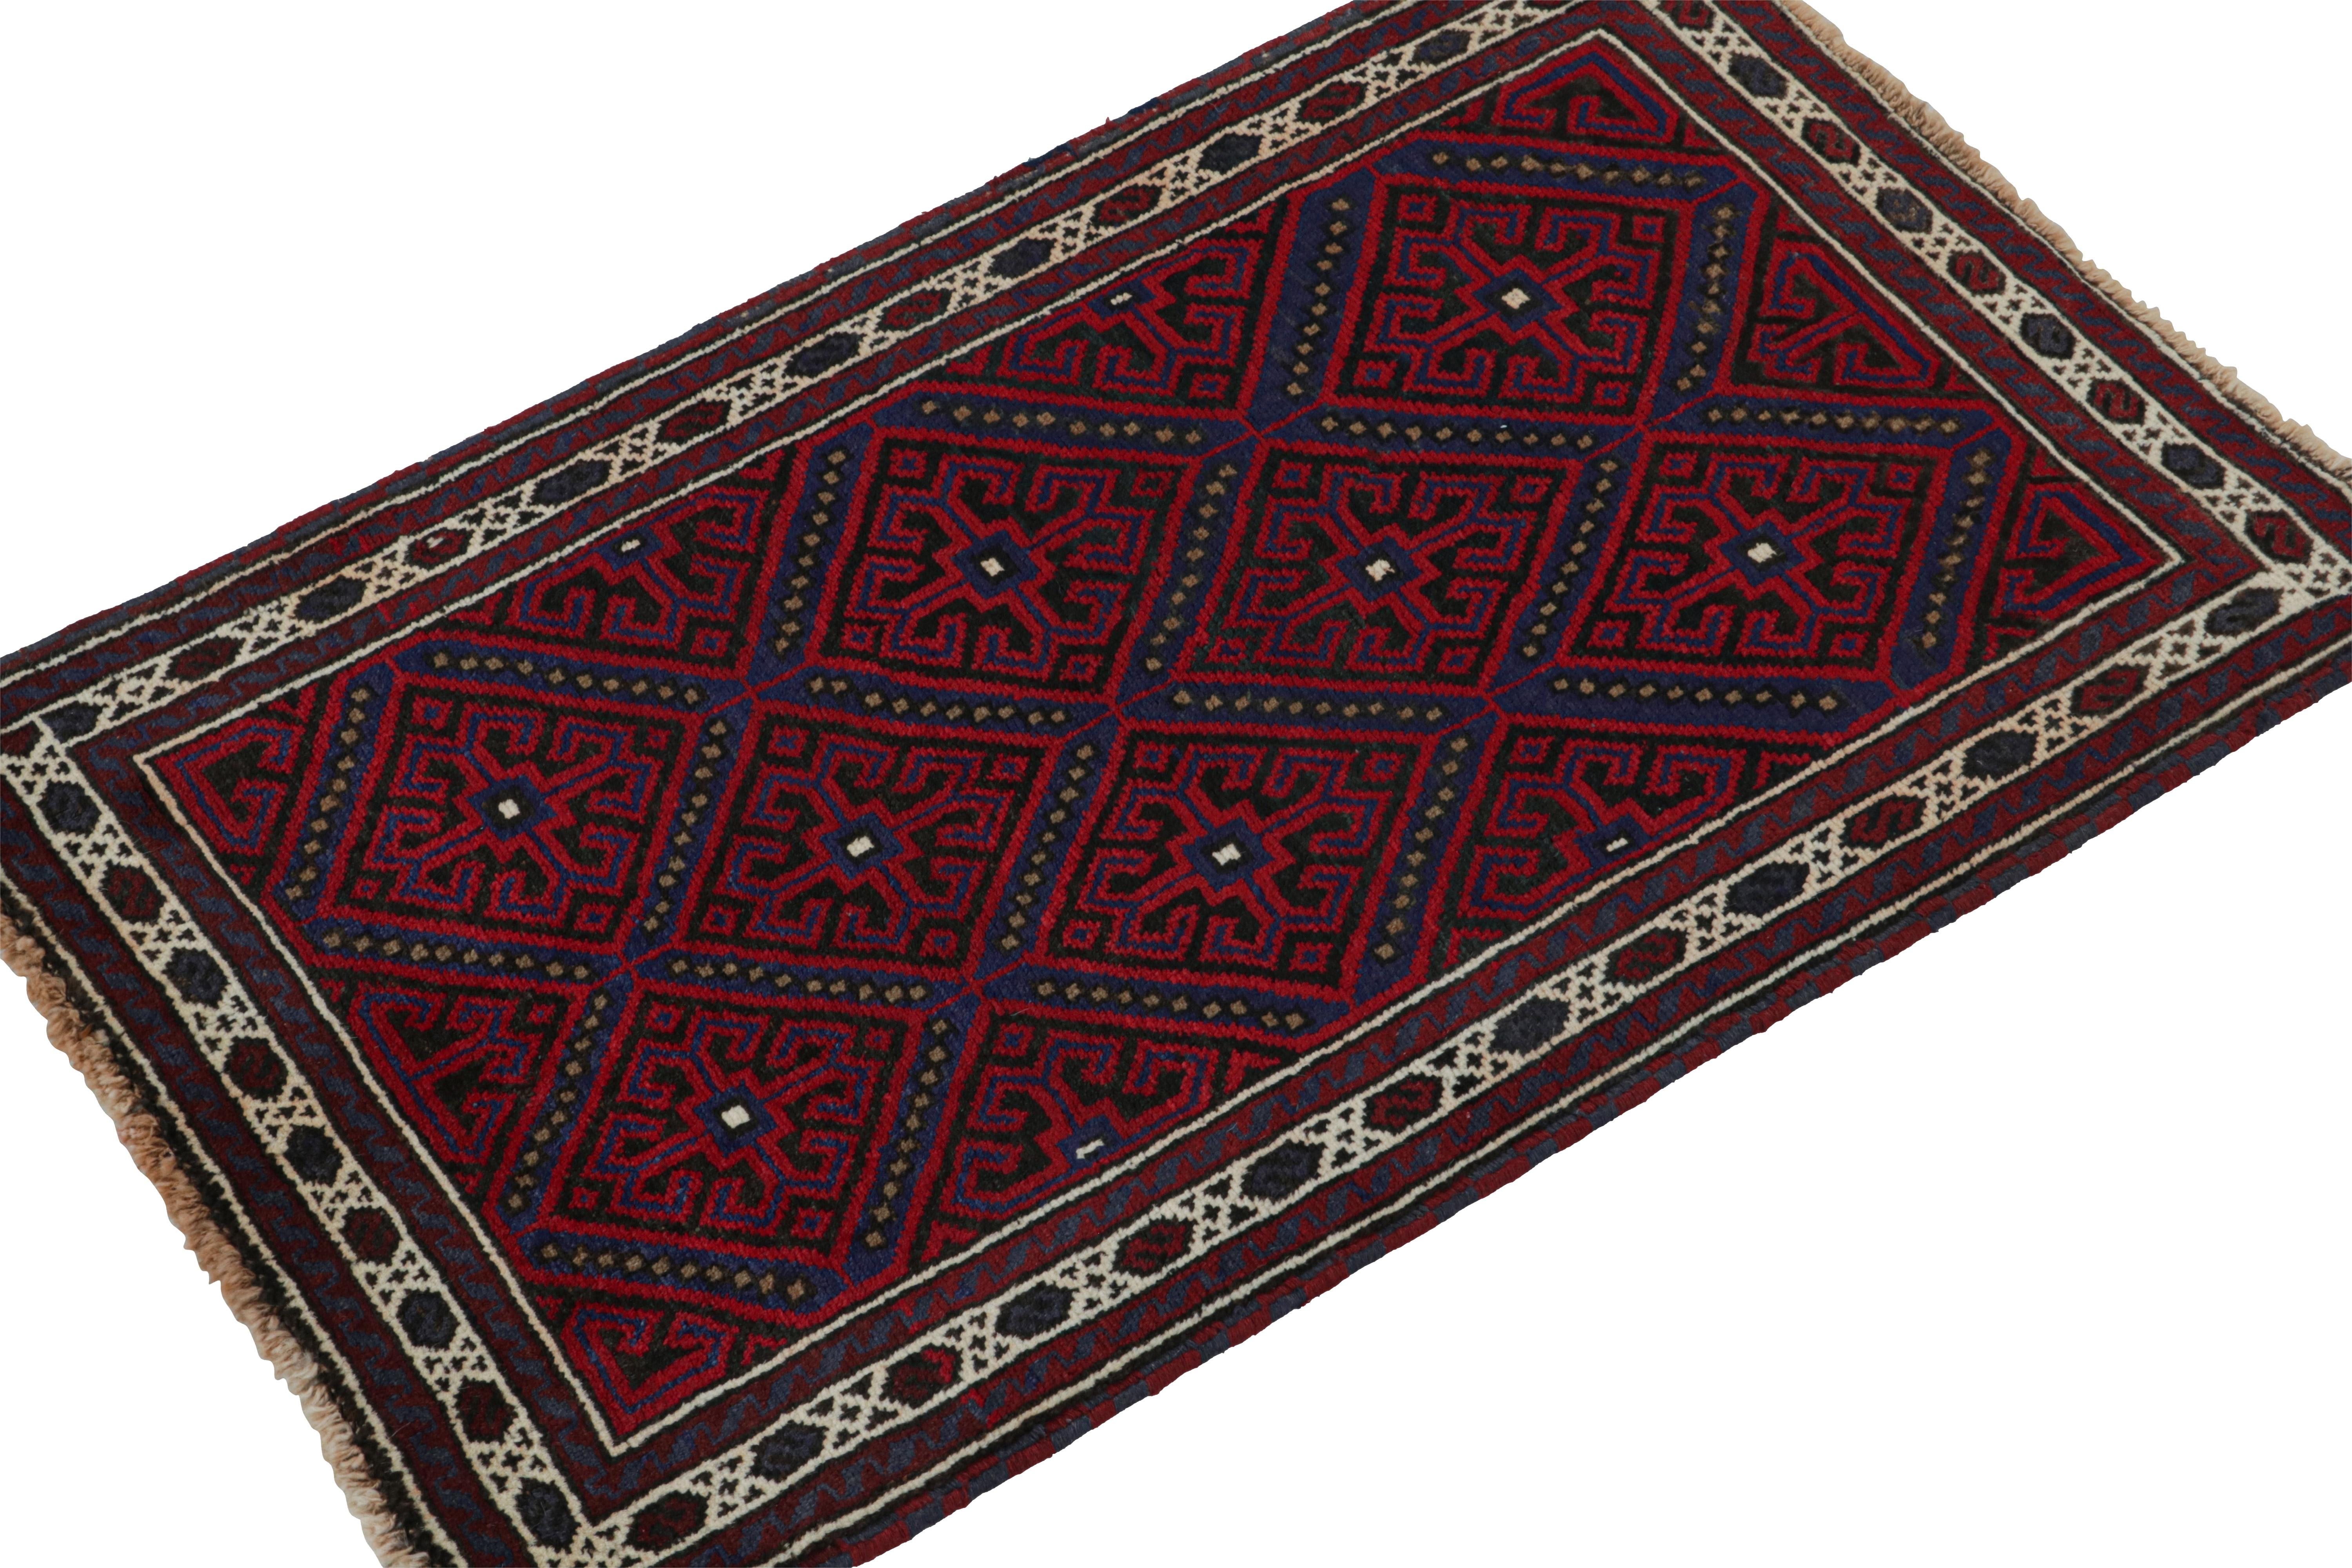 Hand-knotted in wool, this 3x5 Baluch Persian rug of the 1950s is the latest to enter Rug & Kilim’s Antique & Vintage collection.

On the Design:

The piece carries diamond patterns in rich tones of red, blue & black. The field is encased in fine